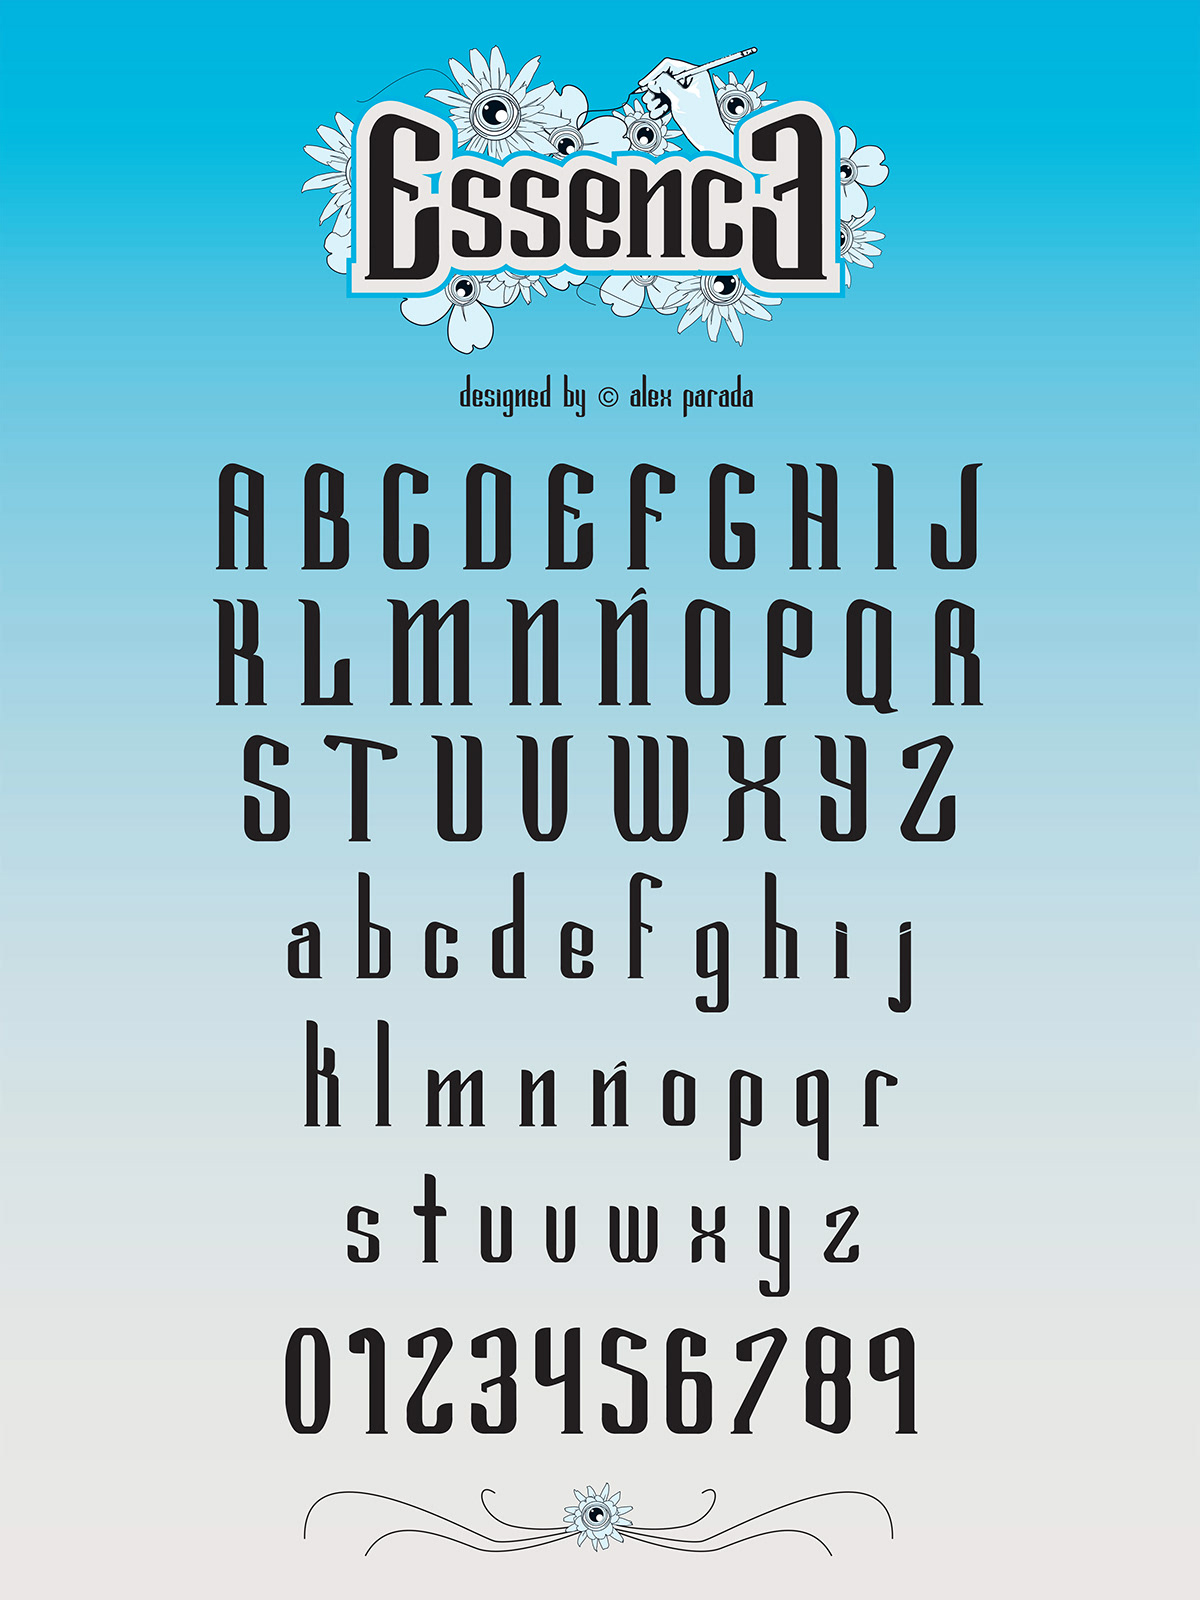 essence Typeface type essence typeface alex parada psychedelic handmade letters letras